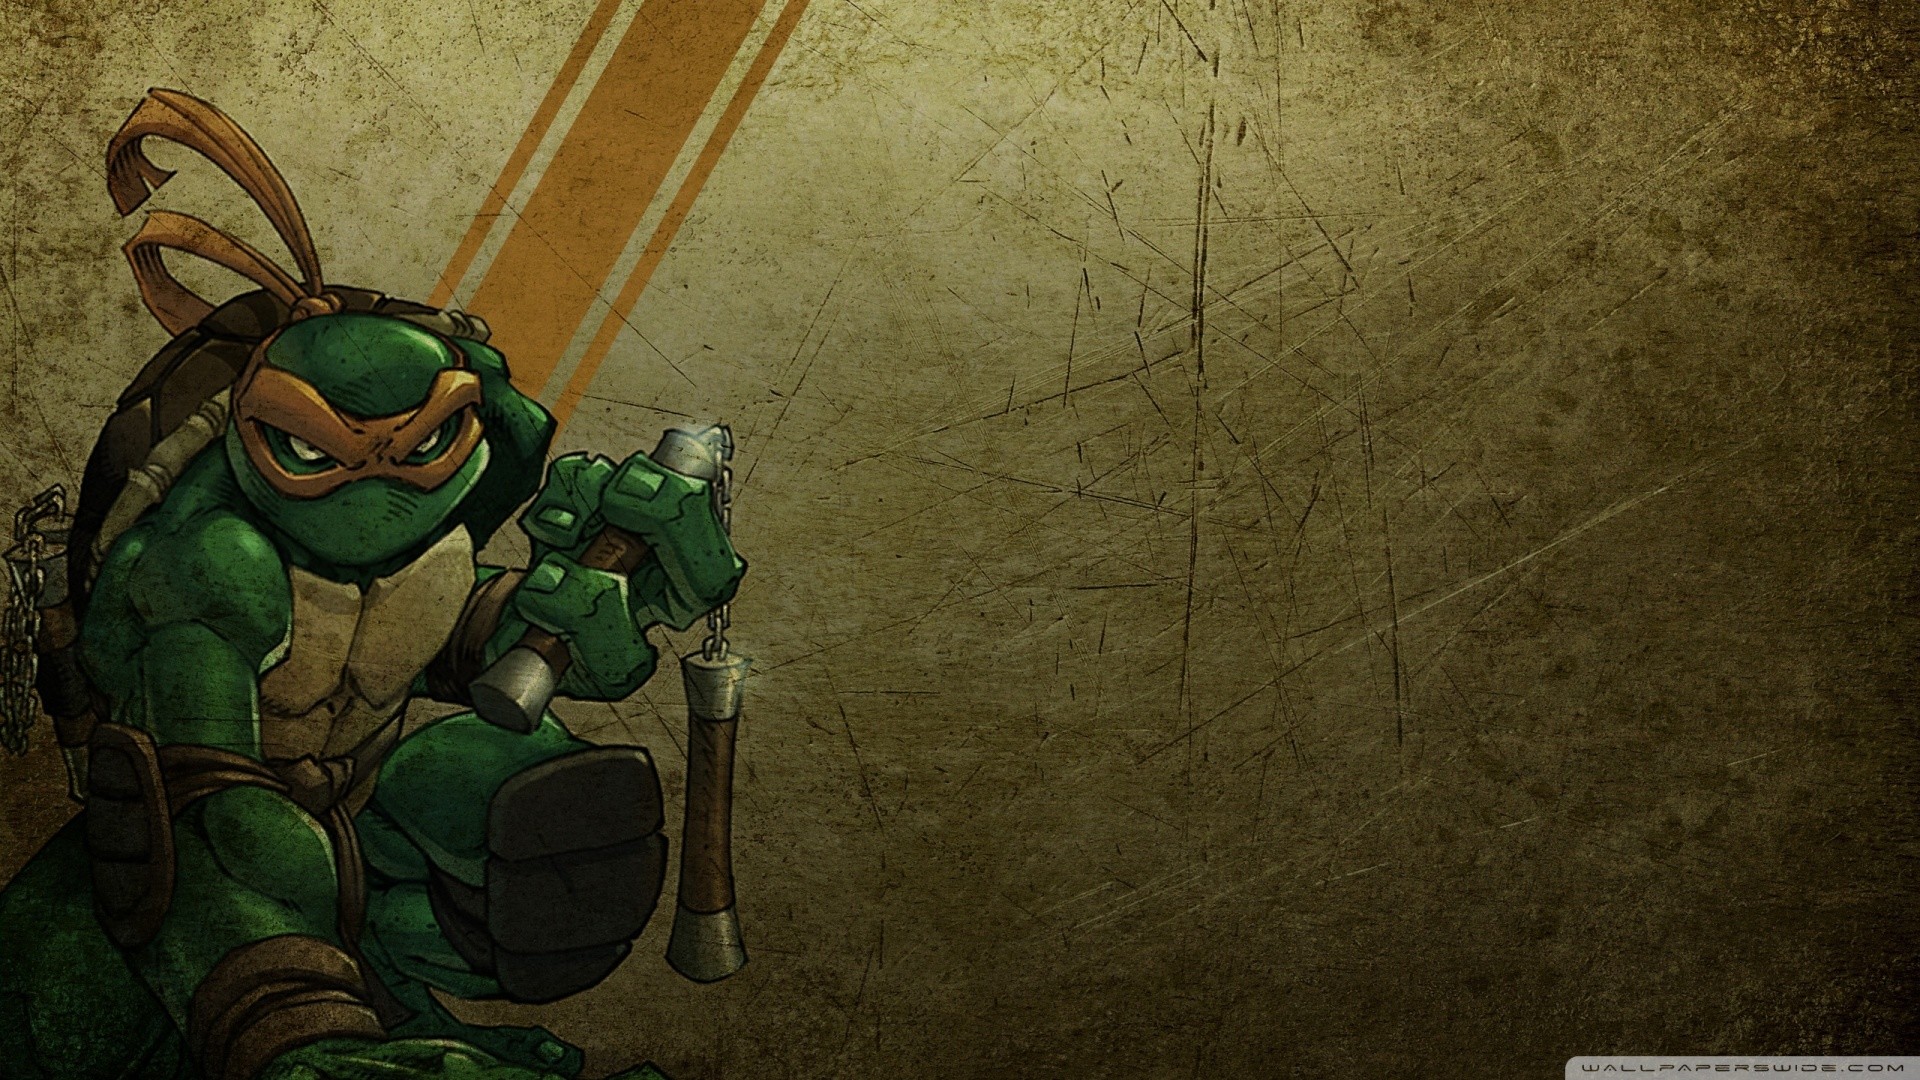 1920x1080 Search Results for “michelangelo ninja turtle wallpaper” – Adorable  Wallpapers